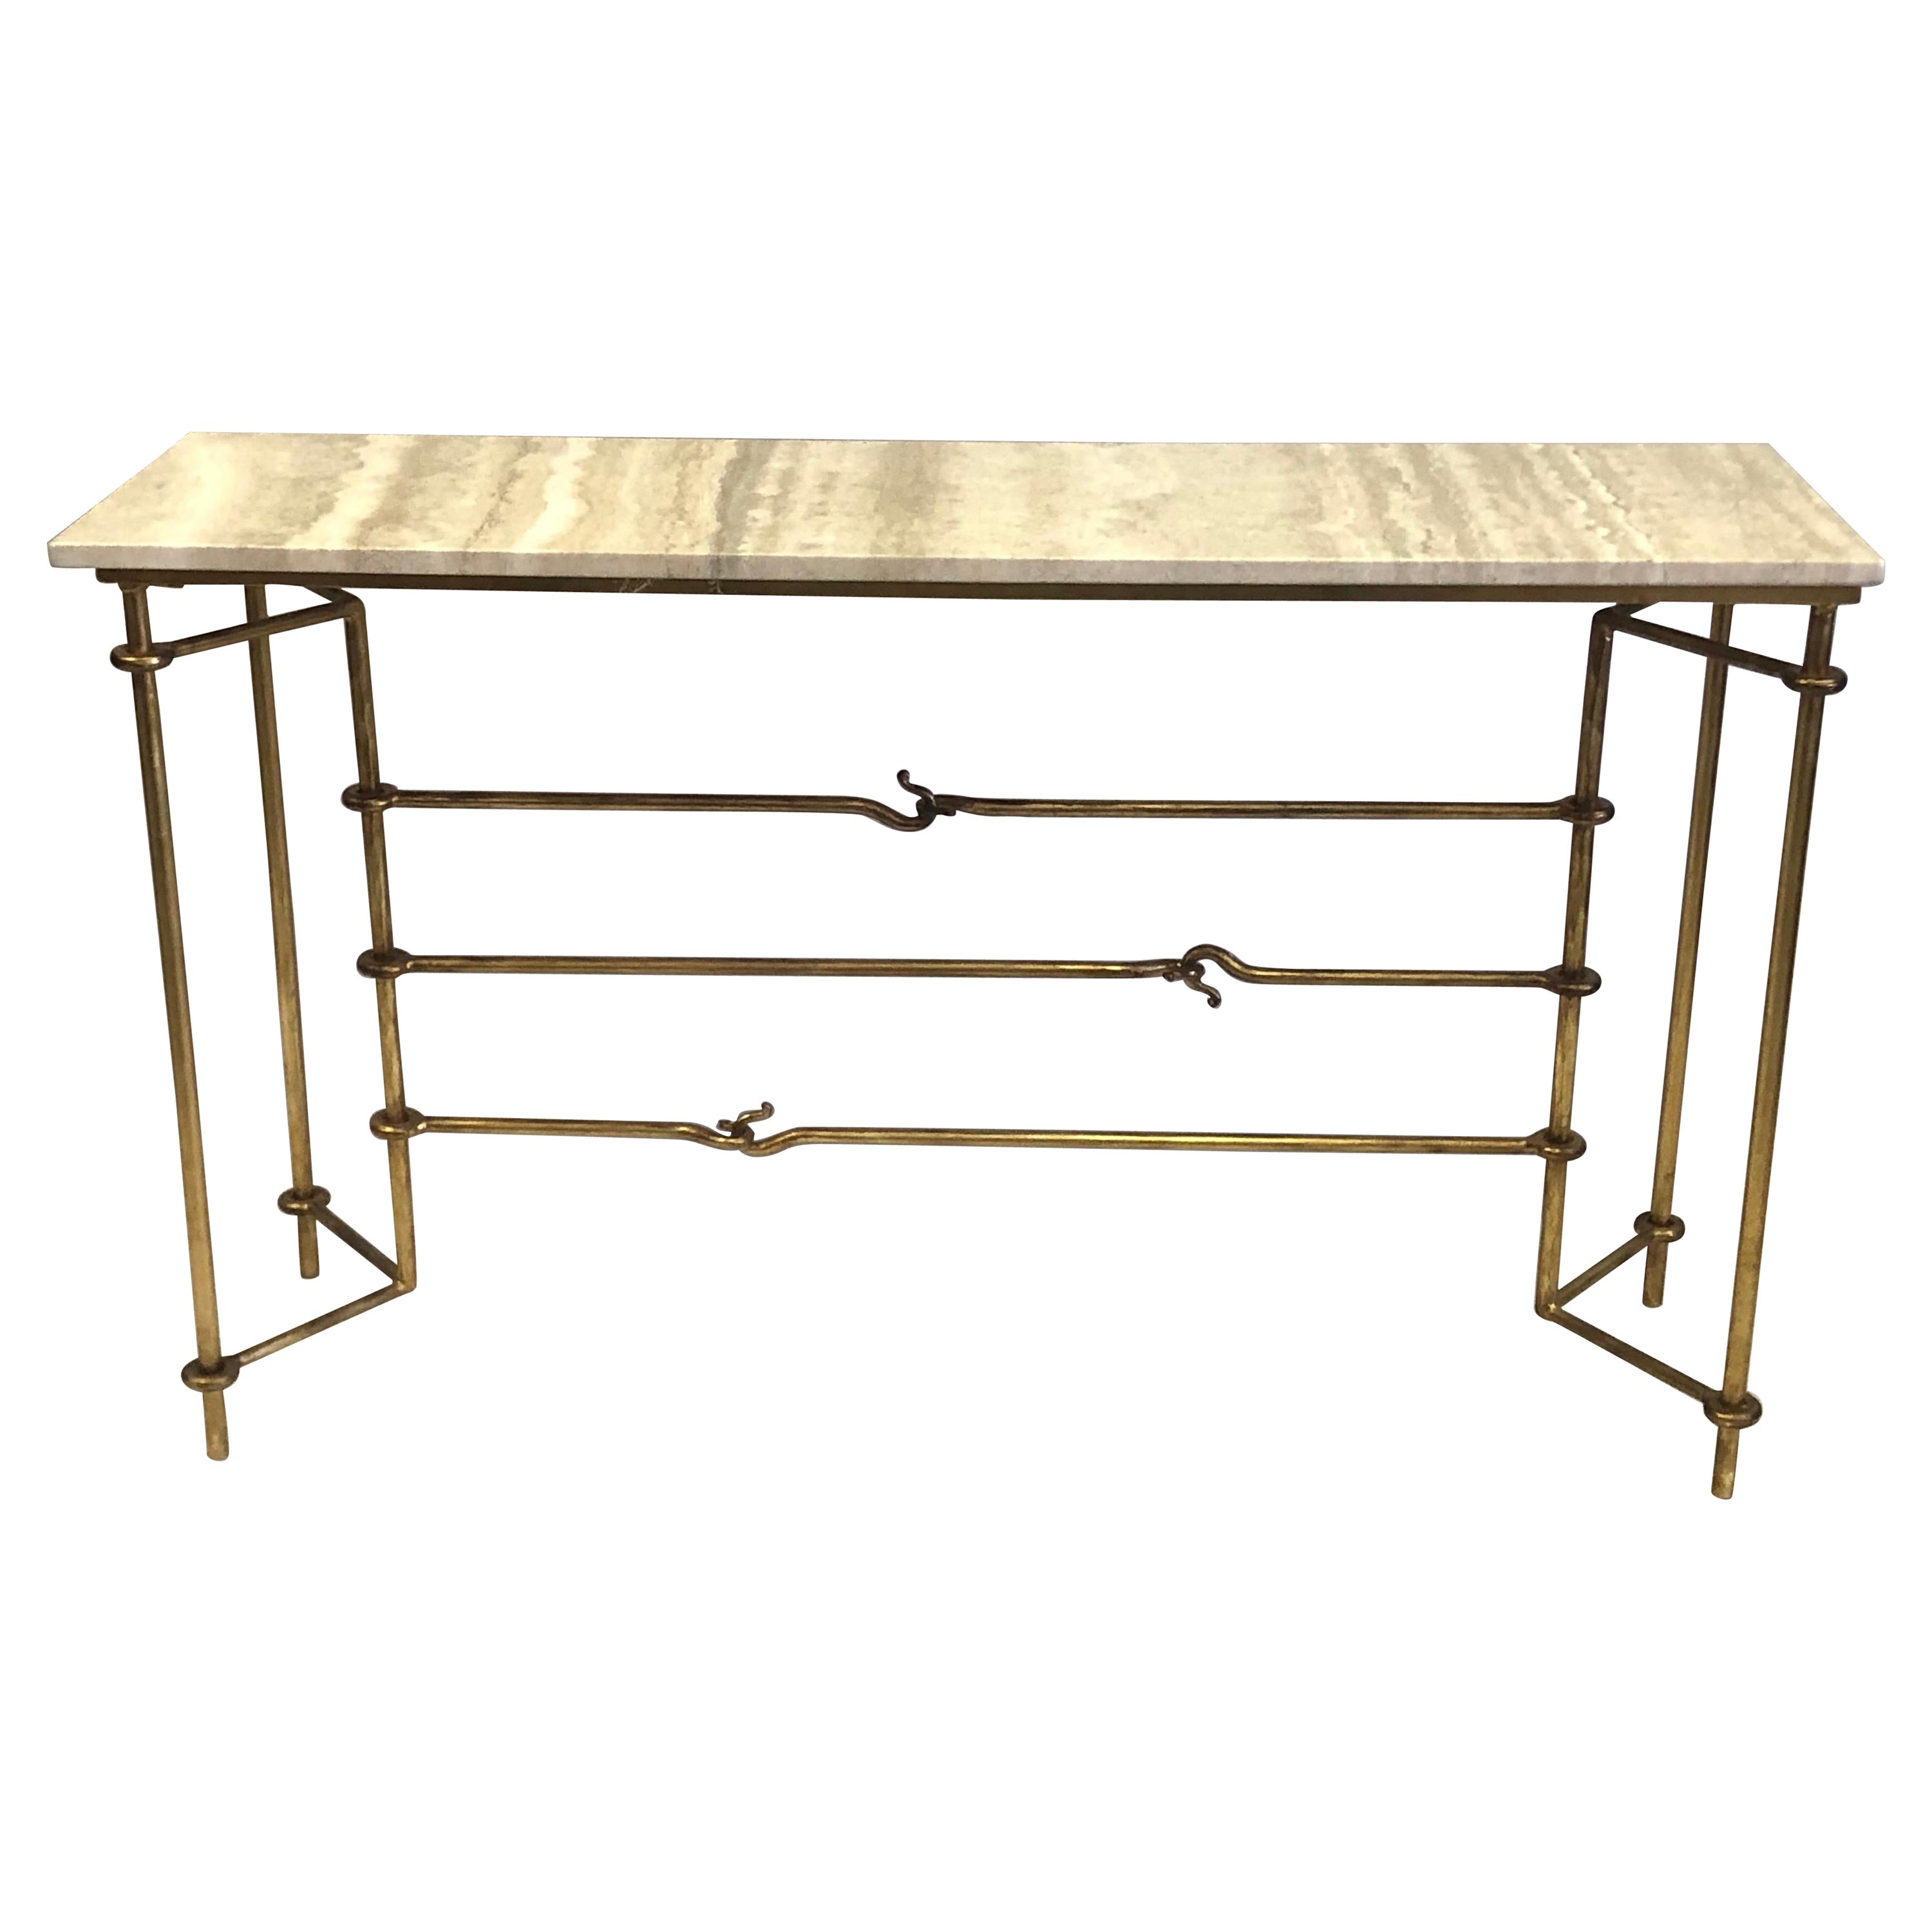 Italian Mid-Century Modern Neoclassical Gilt Iron Console by Banci for Hermès